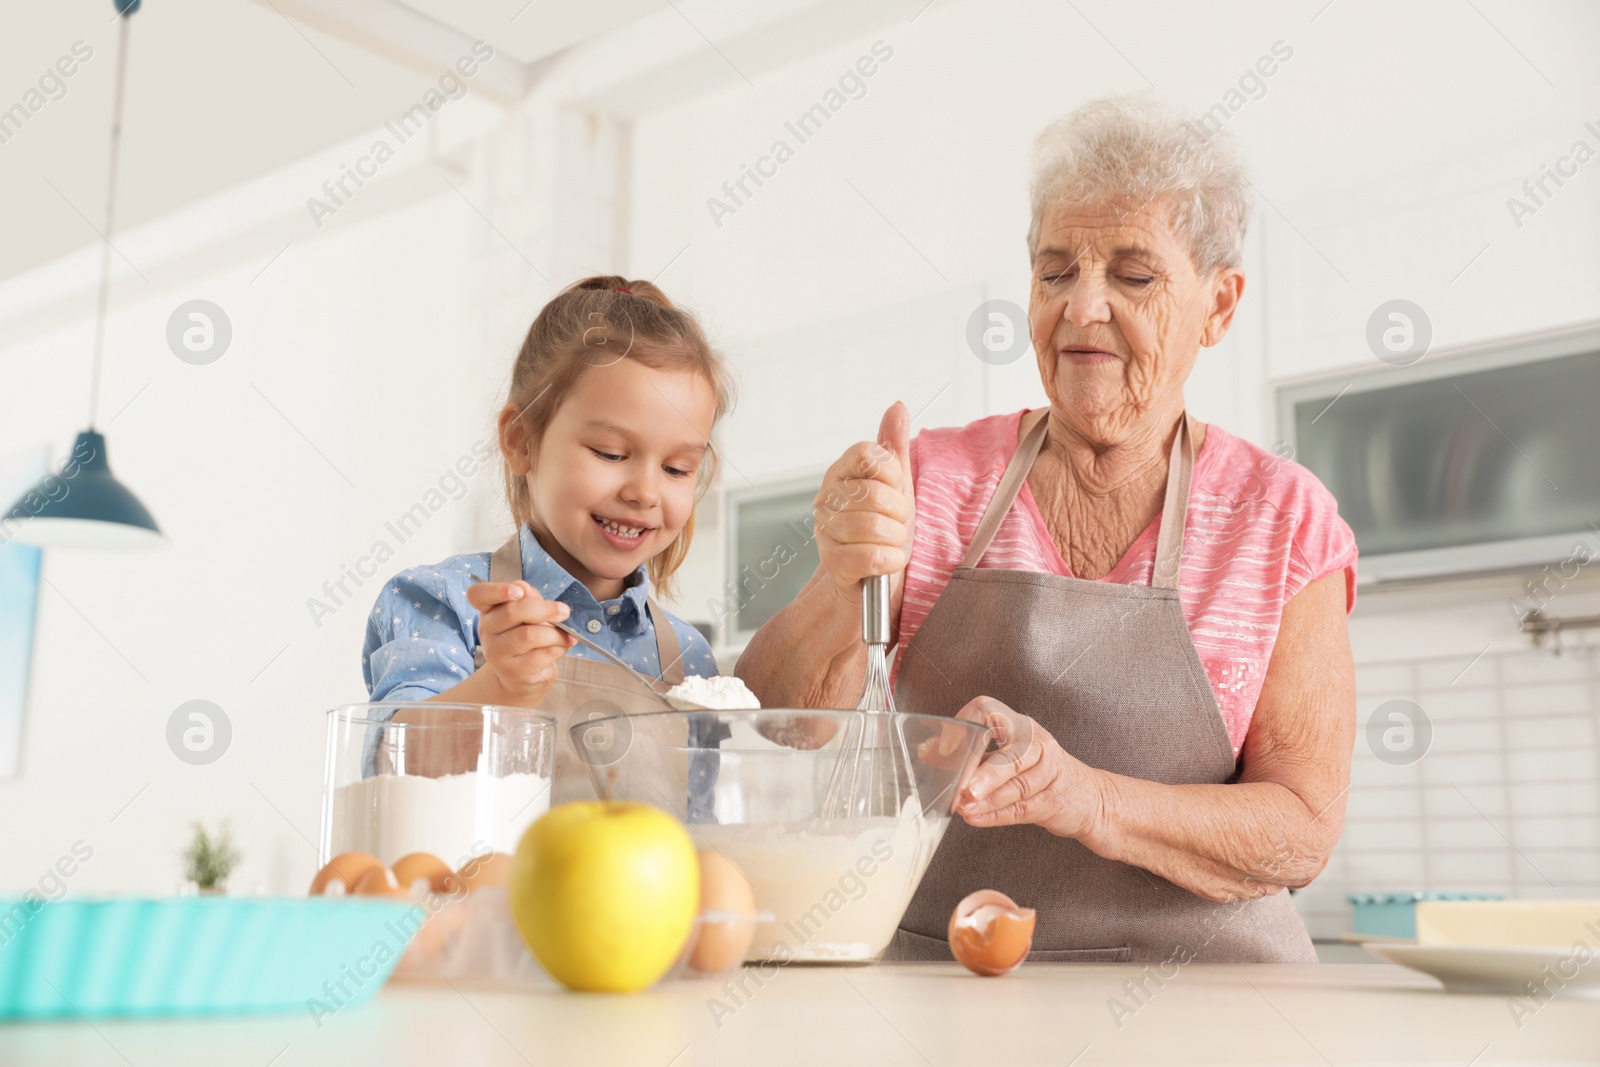 Photo of Cute girl and her grandmother cooking in kitchen